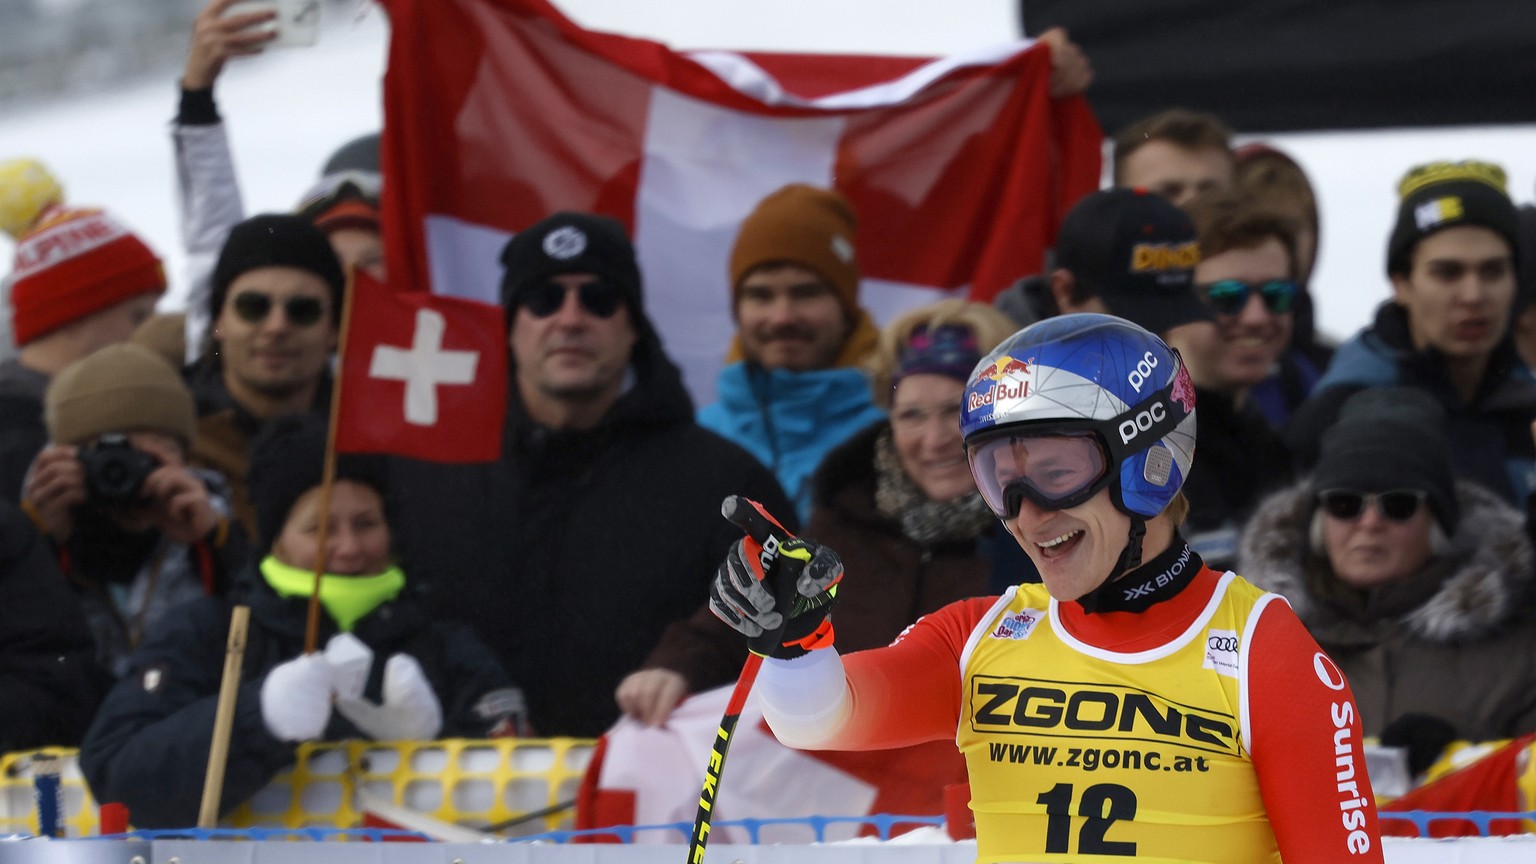 Switzerland&#039;s Marco Odermatt reacts in the finish area during the men&#039;s downhill ski race at the FIS Alpine Skiing World Cup in Lake Louise, Alberta, Saturday, Nov. 26, 2022. (Jeff McIntosh/ ...